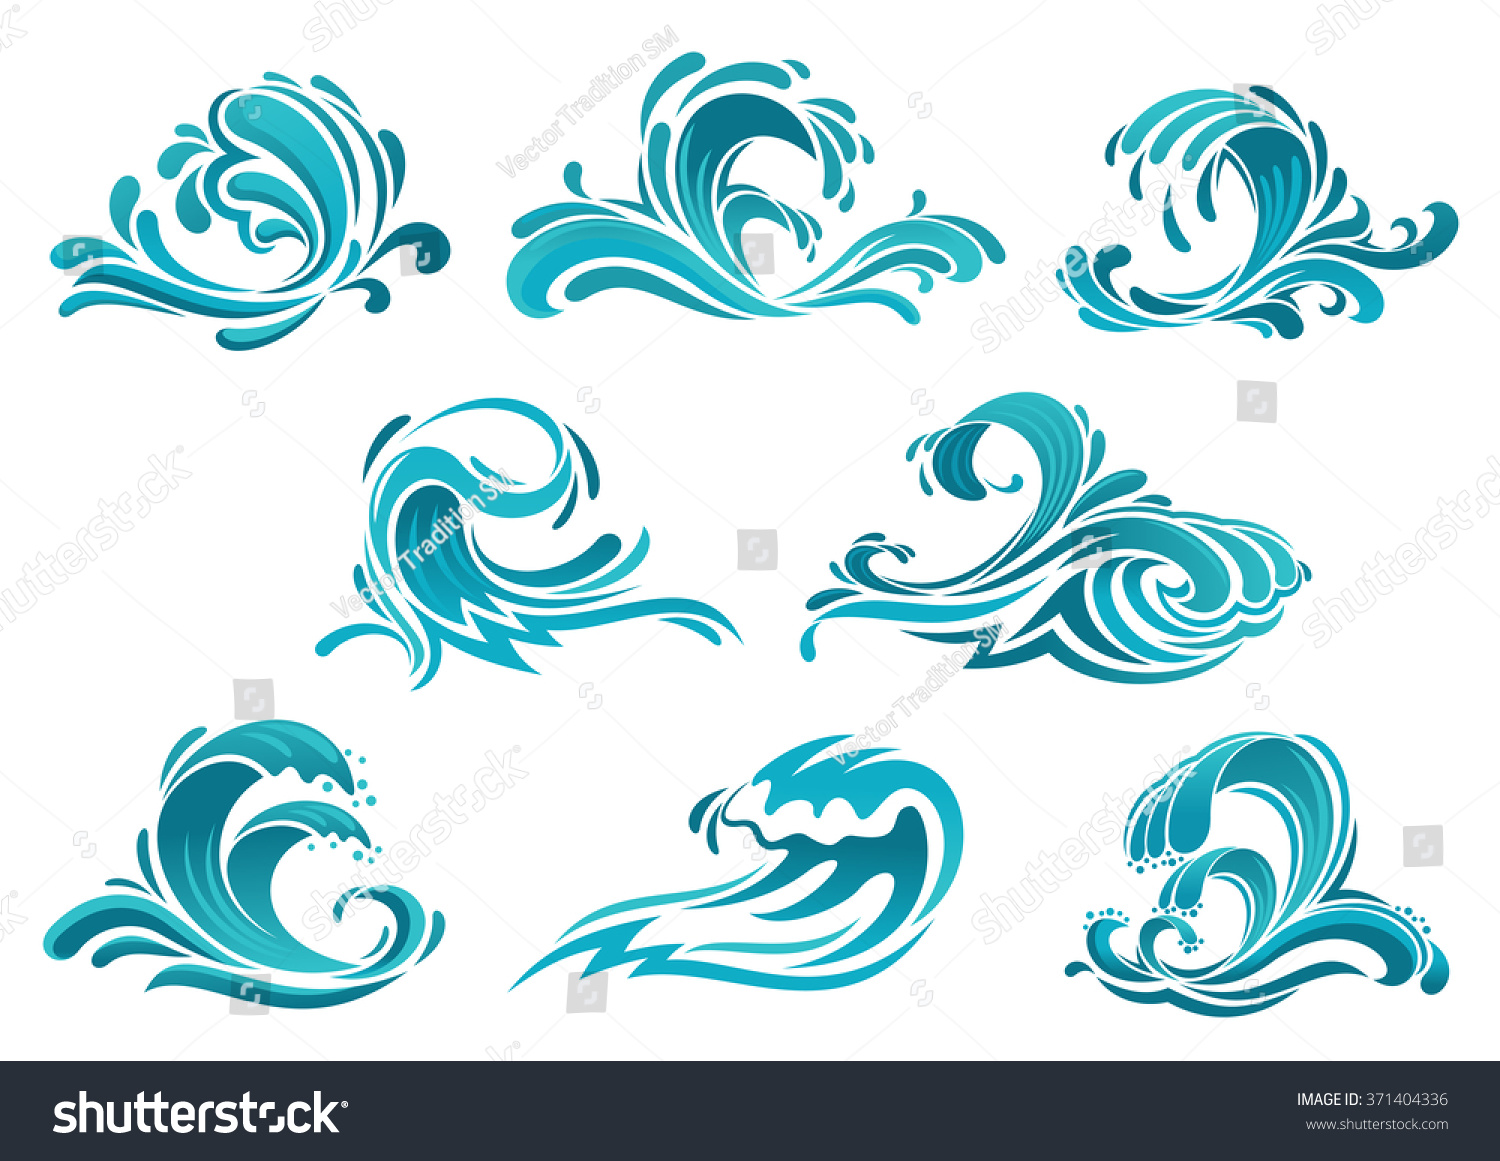 Decorative Blue Sea Waves And Surf Icons With Curls Of Powerful Water ...